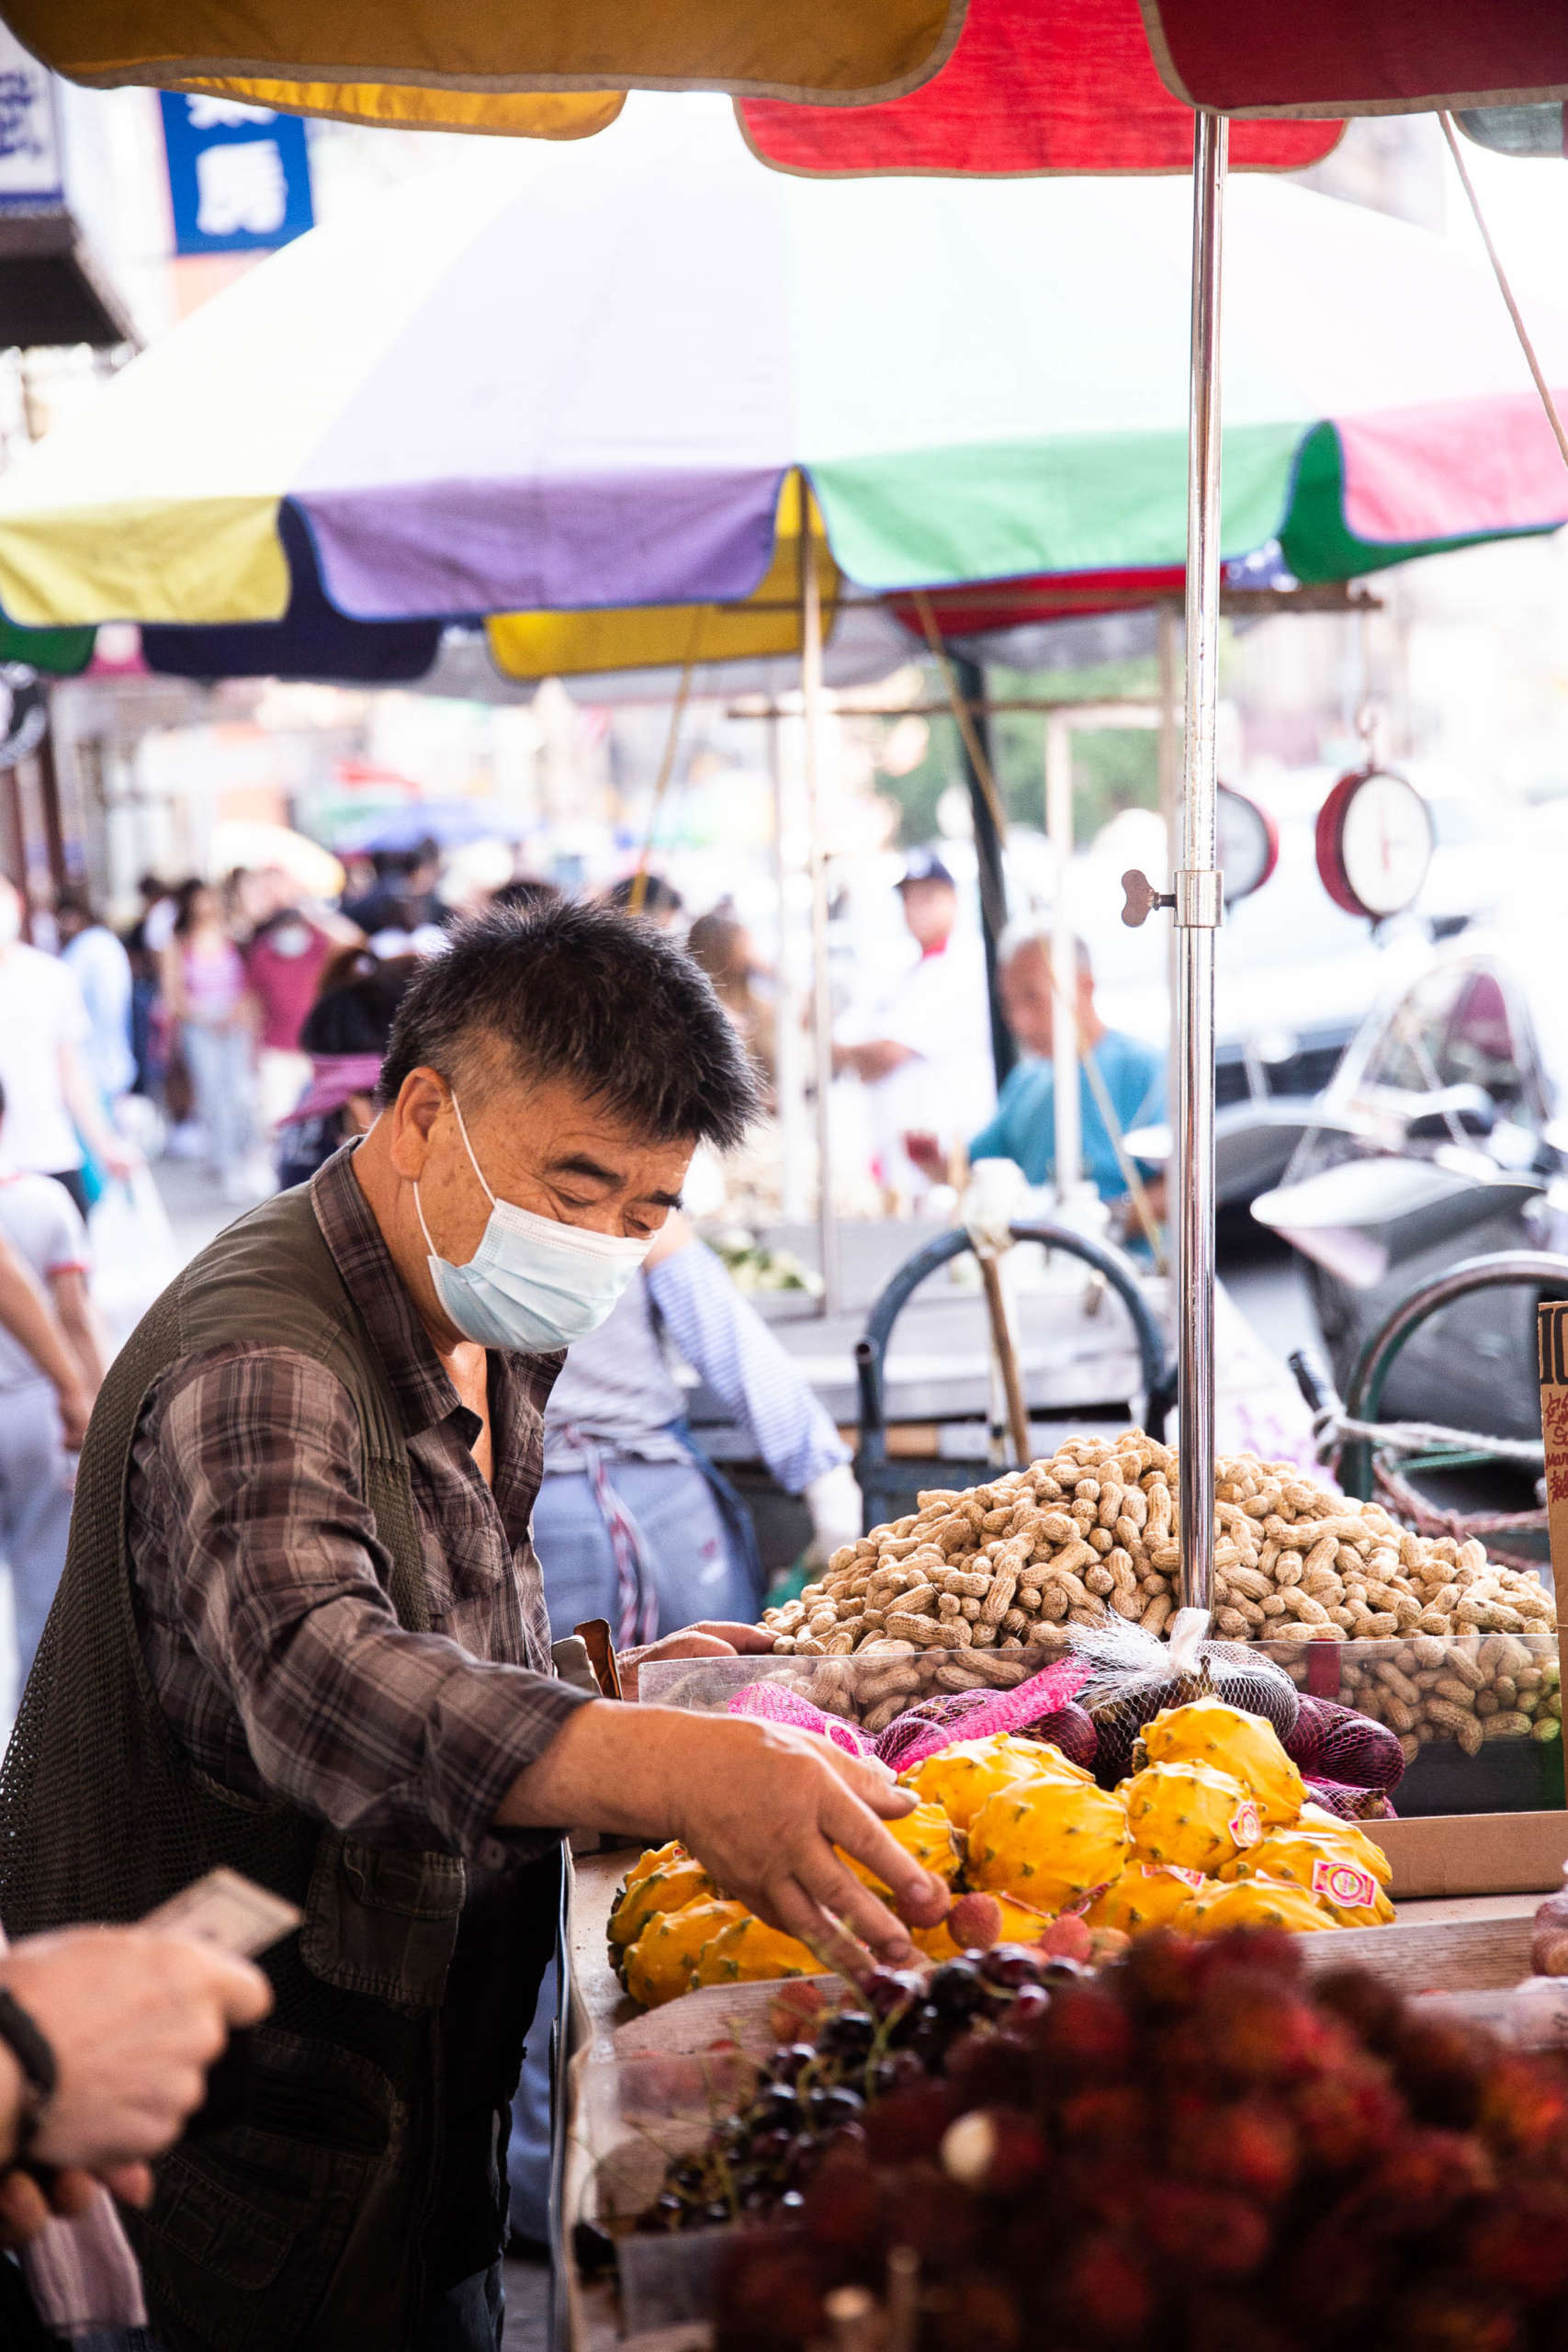 A person in a brown vest and shirt, wearing a blue surgical mask, thoughtfully selects a kiwano melon (or horned melon) from an outdoor food stand with a colorful umbrella above it. Other food is displayed nearby, including peanuts and cherries, and out-of-focus crowds move in the background.